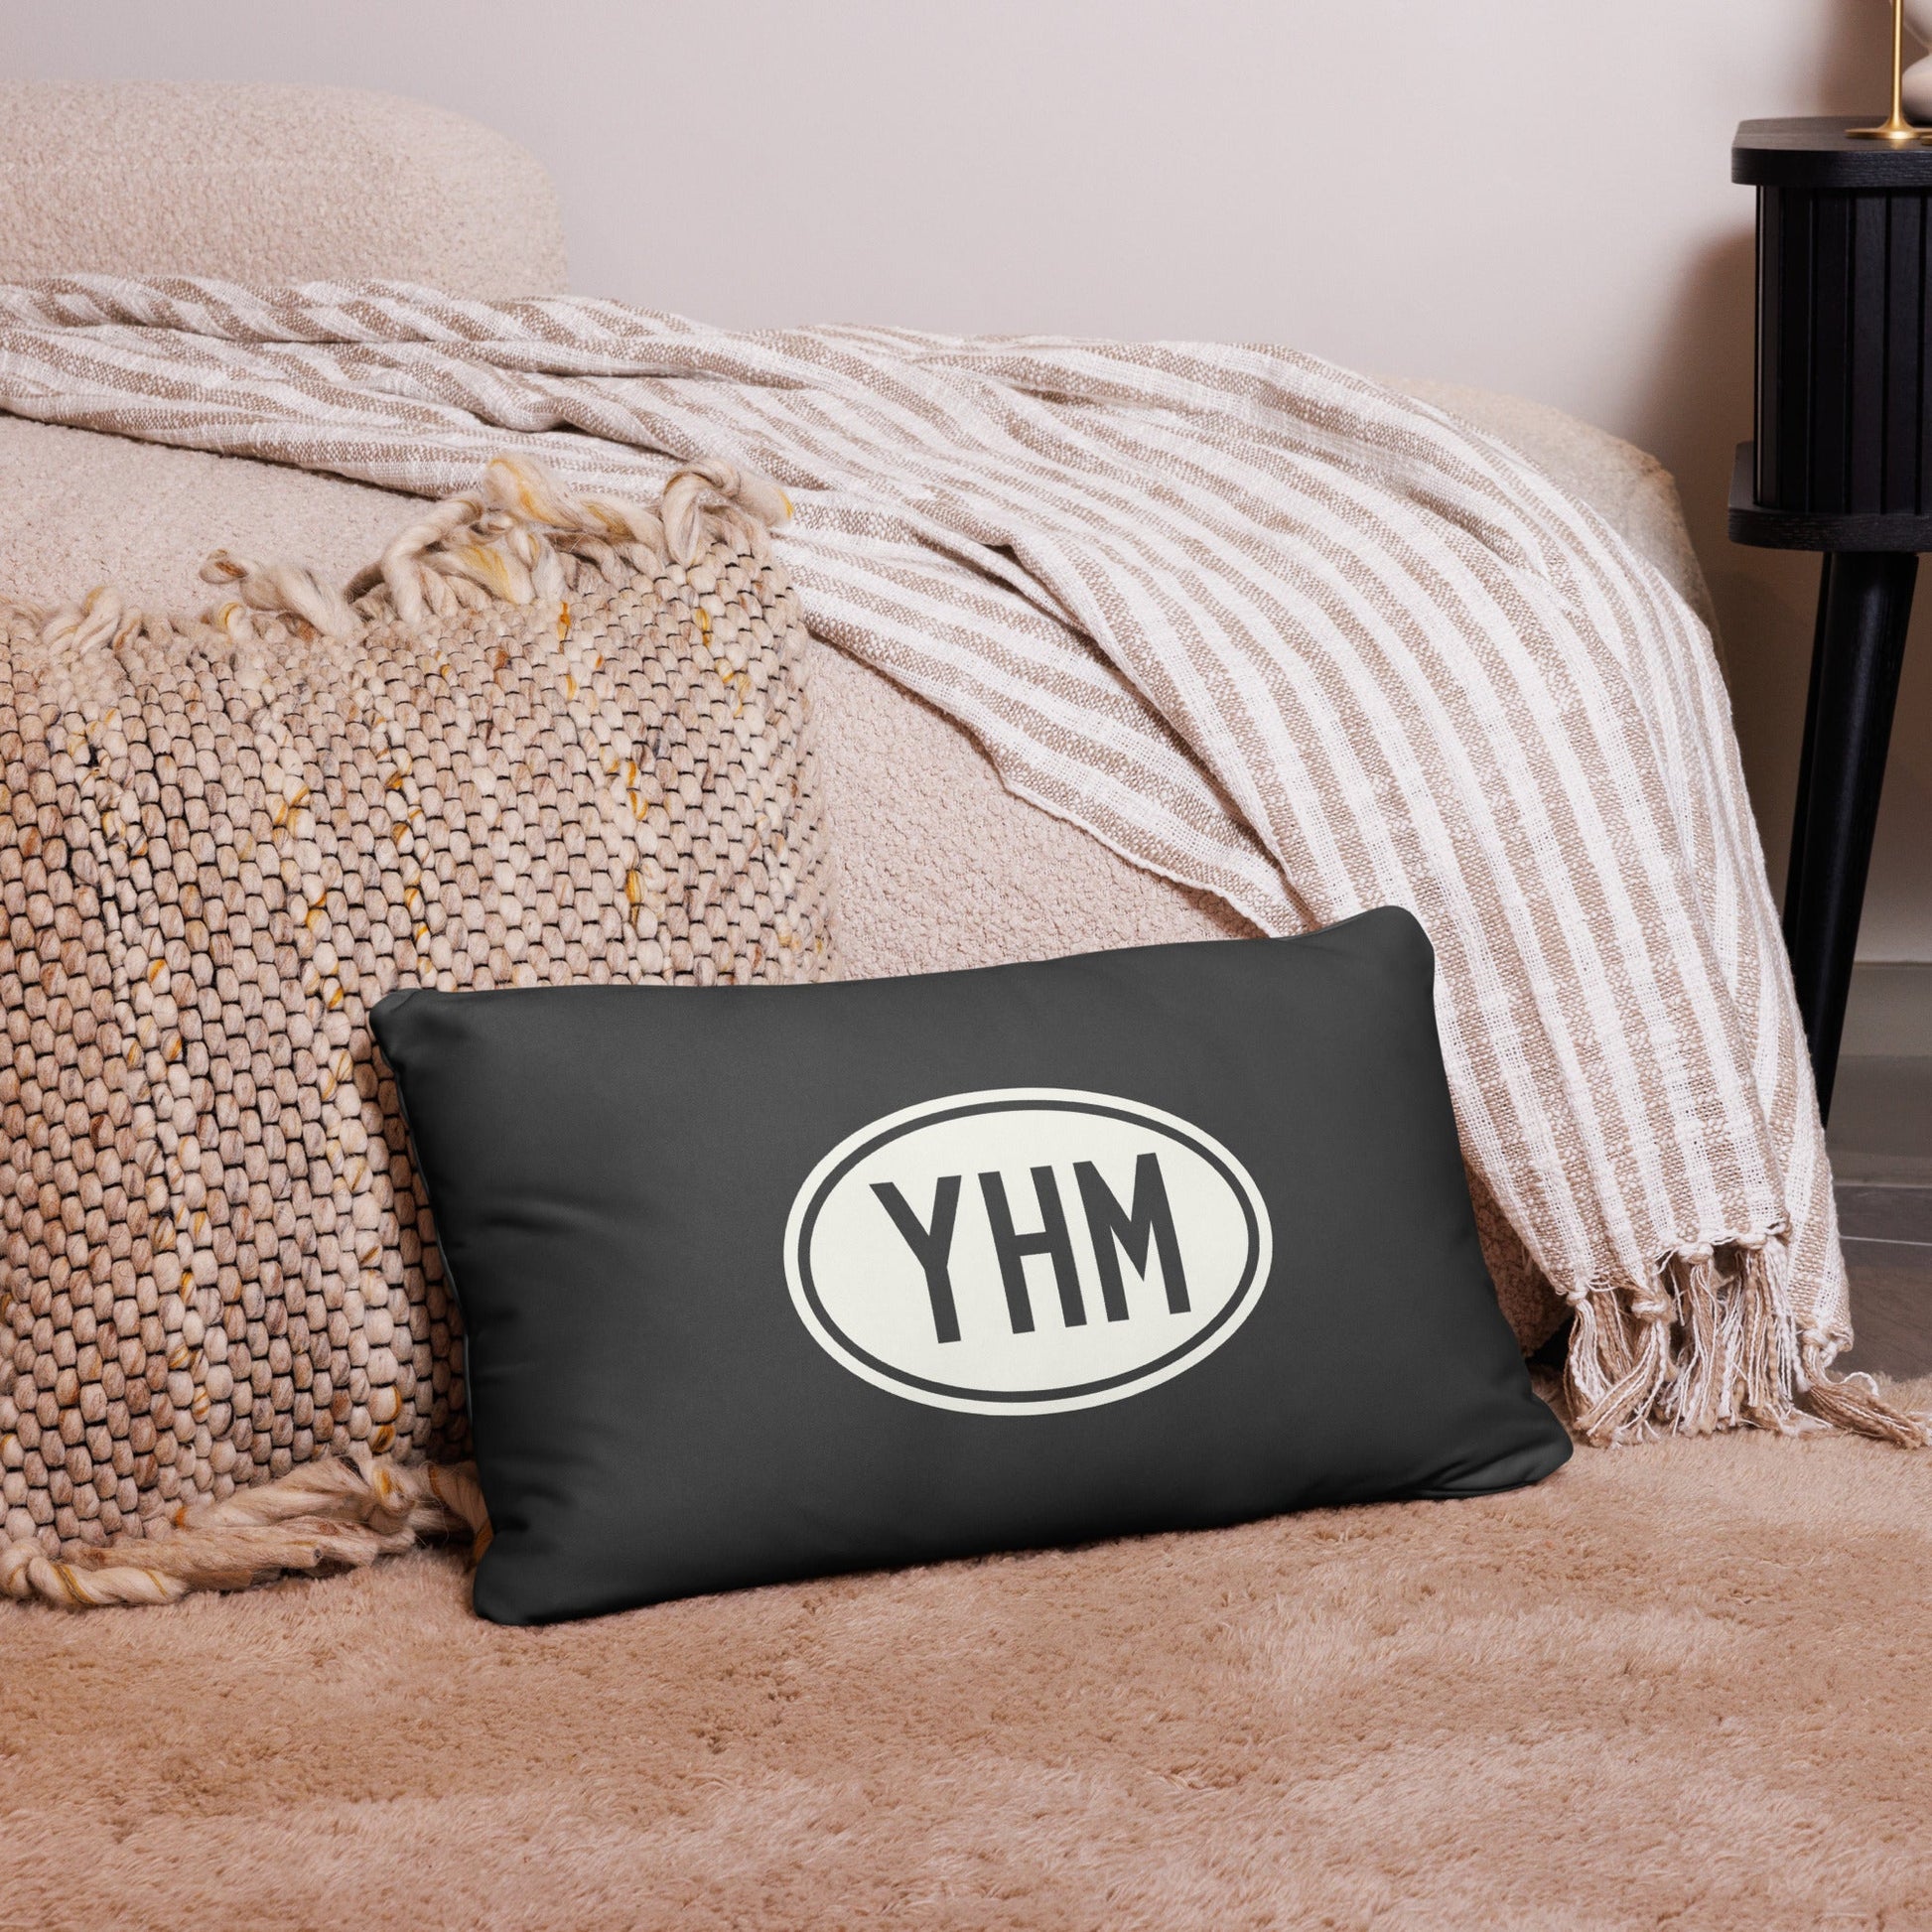 Unique Travel Gift Throw Pillow - White Oval • YYC Calgary • YHM Designs - Image 05